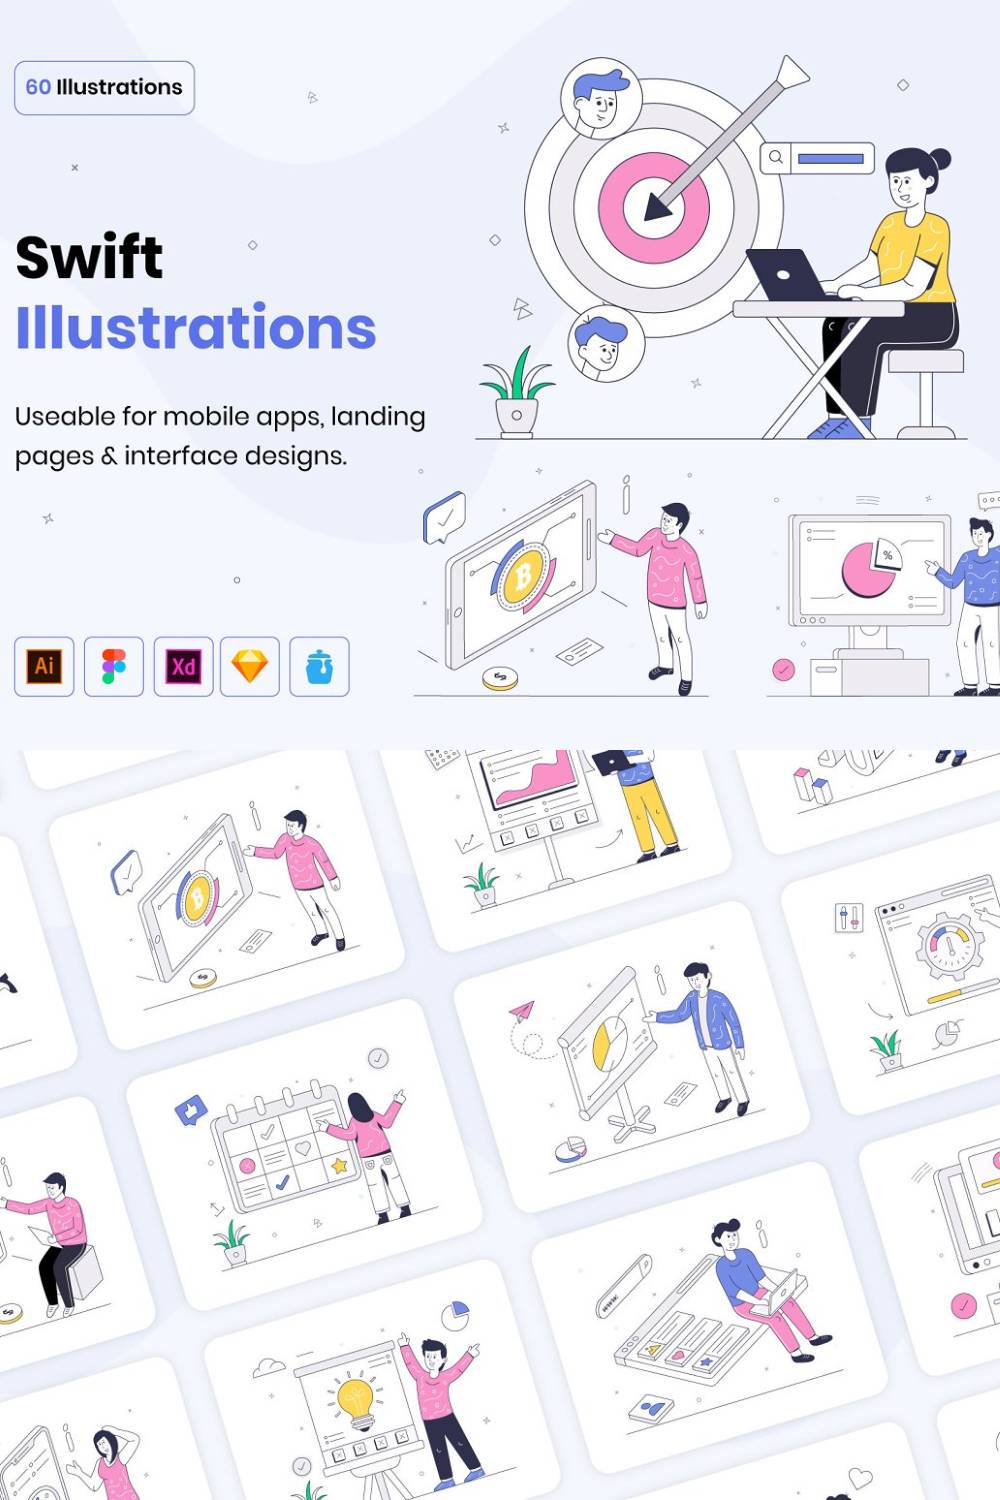 60 Perfect Swift Illustrations Pinterest Cover.